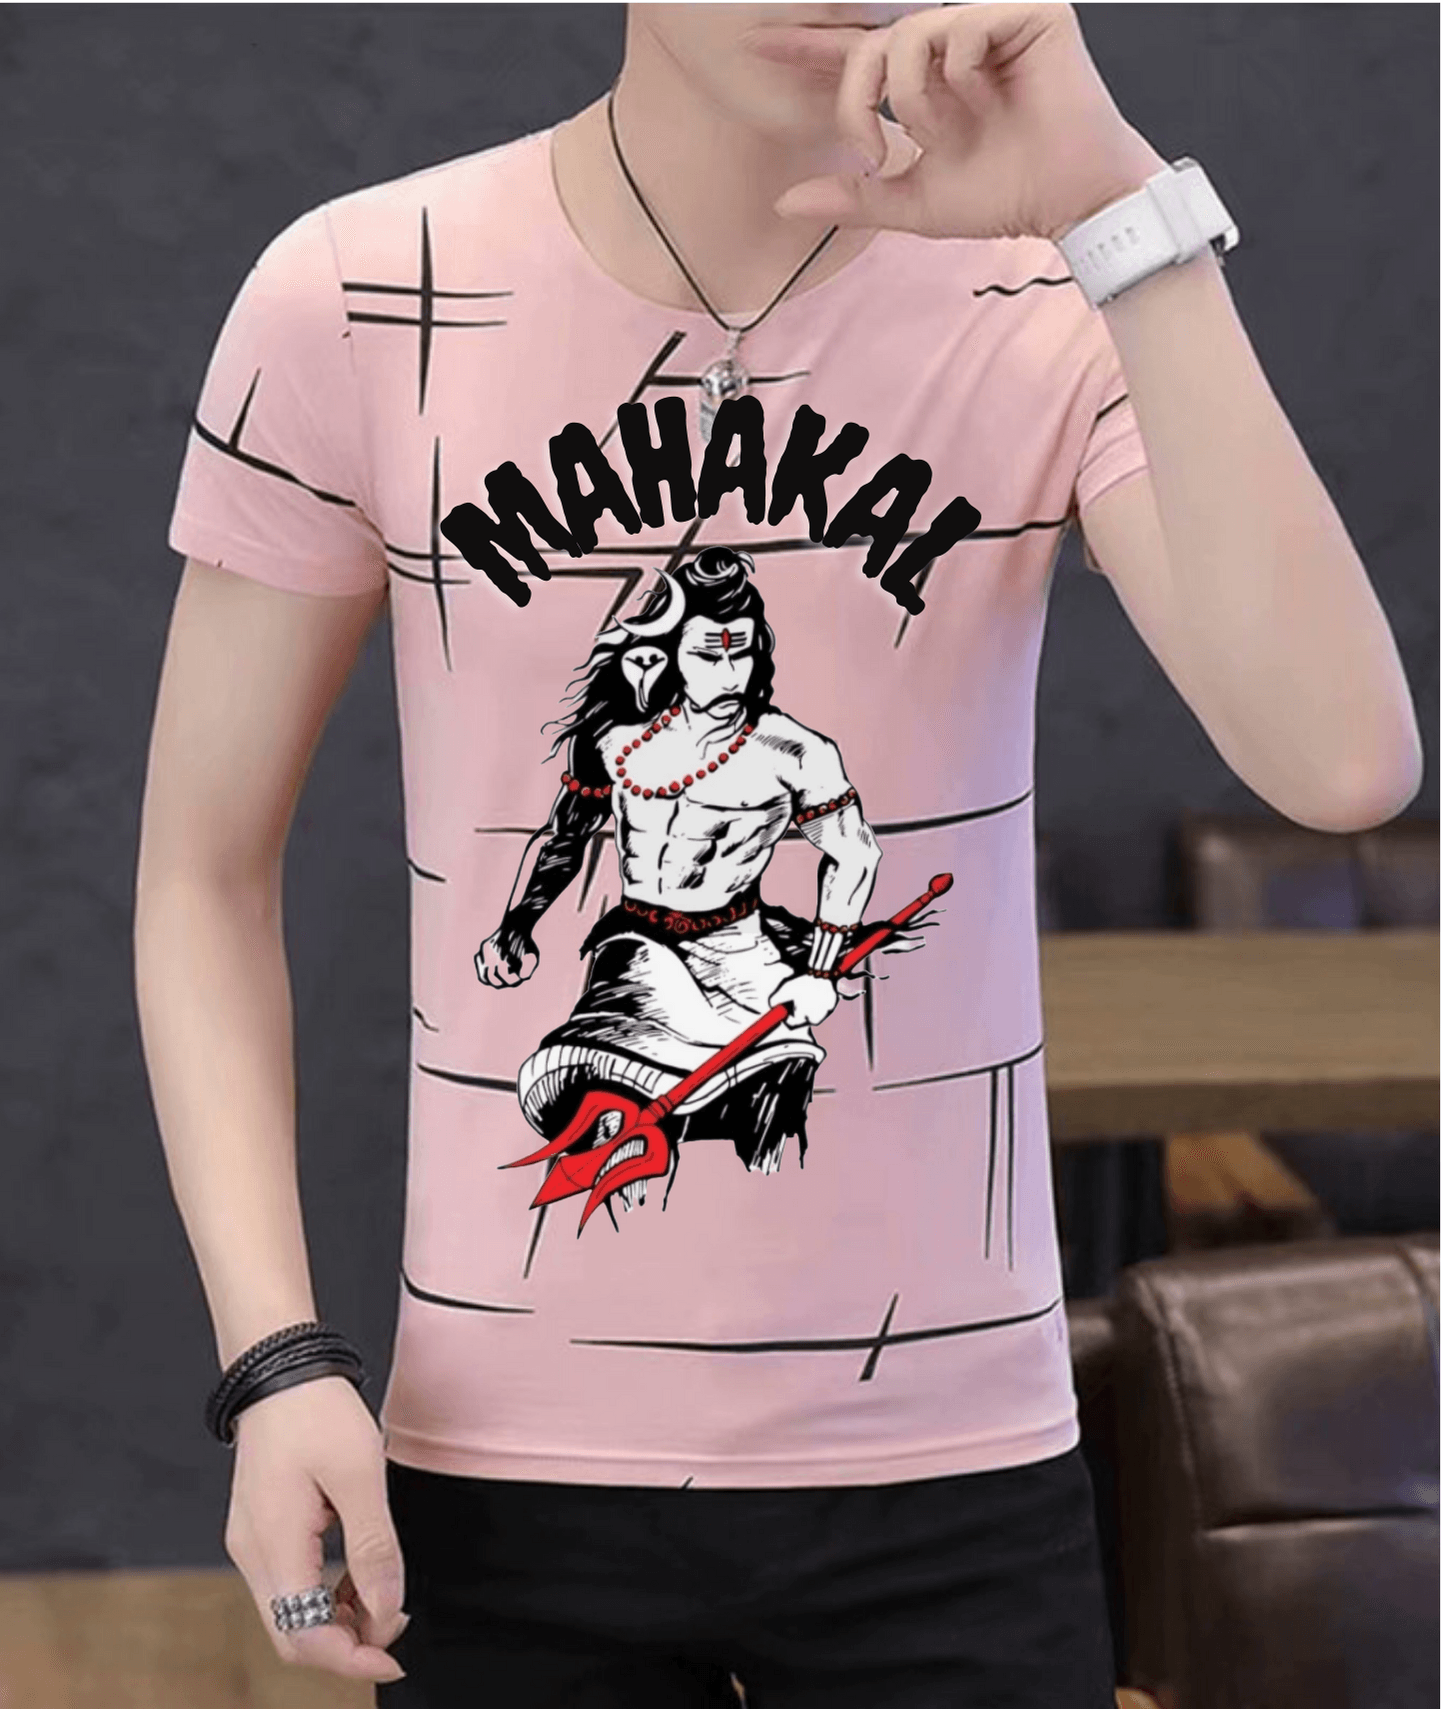 Shiva T Shirts For Men - Mahakal - UD FABRIC - Your Style our Design